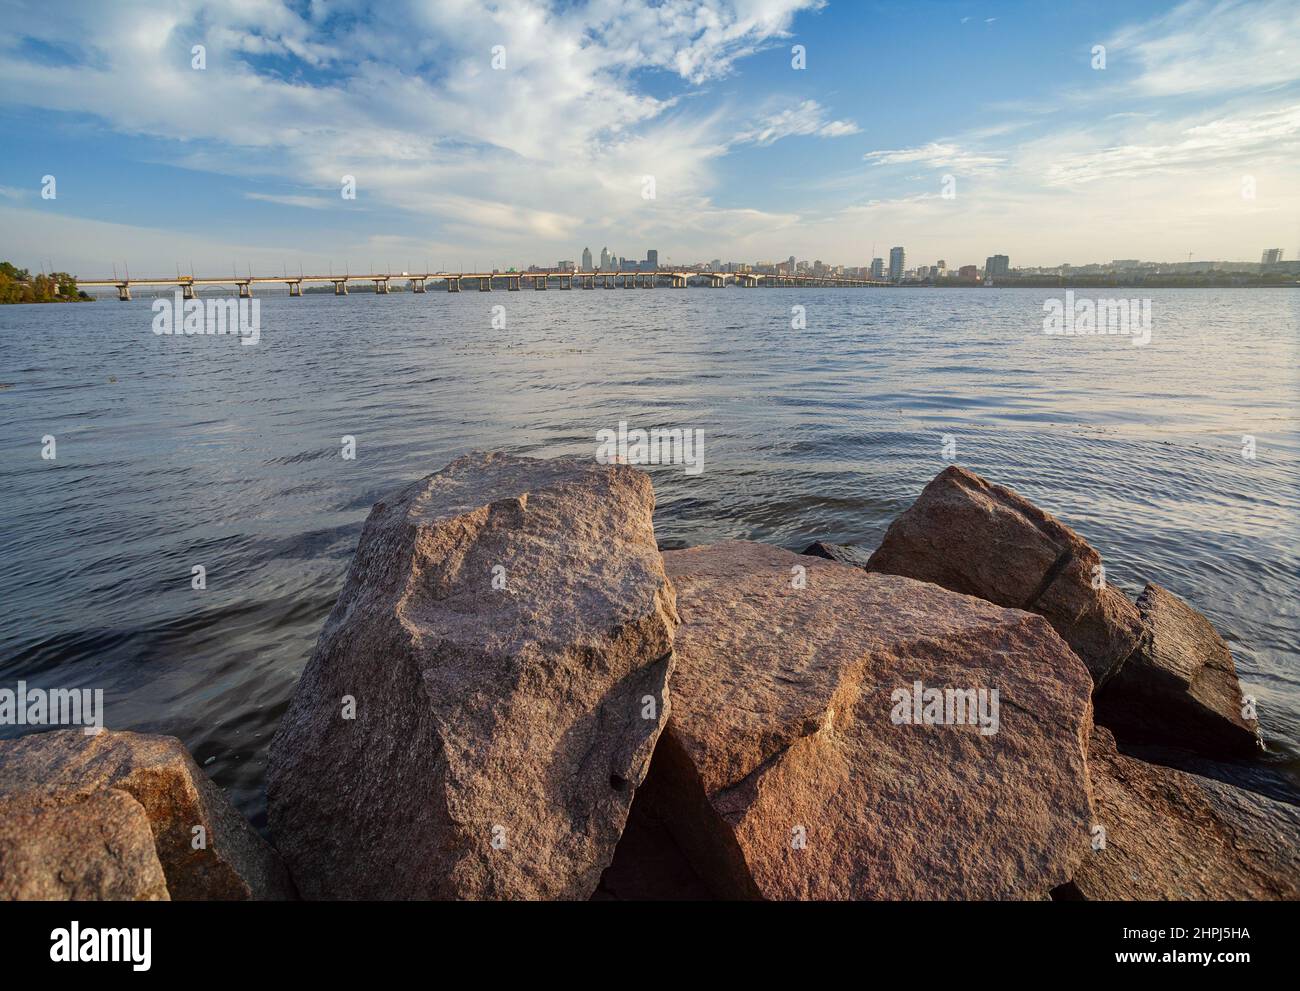 Dnepropetrovsk, panorama of the city, center and central bridge on the banks of the Dnieper, granite stones in the foreground Stock Photo